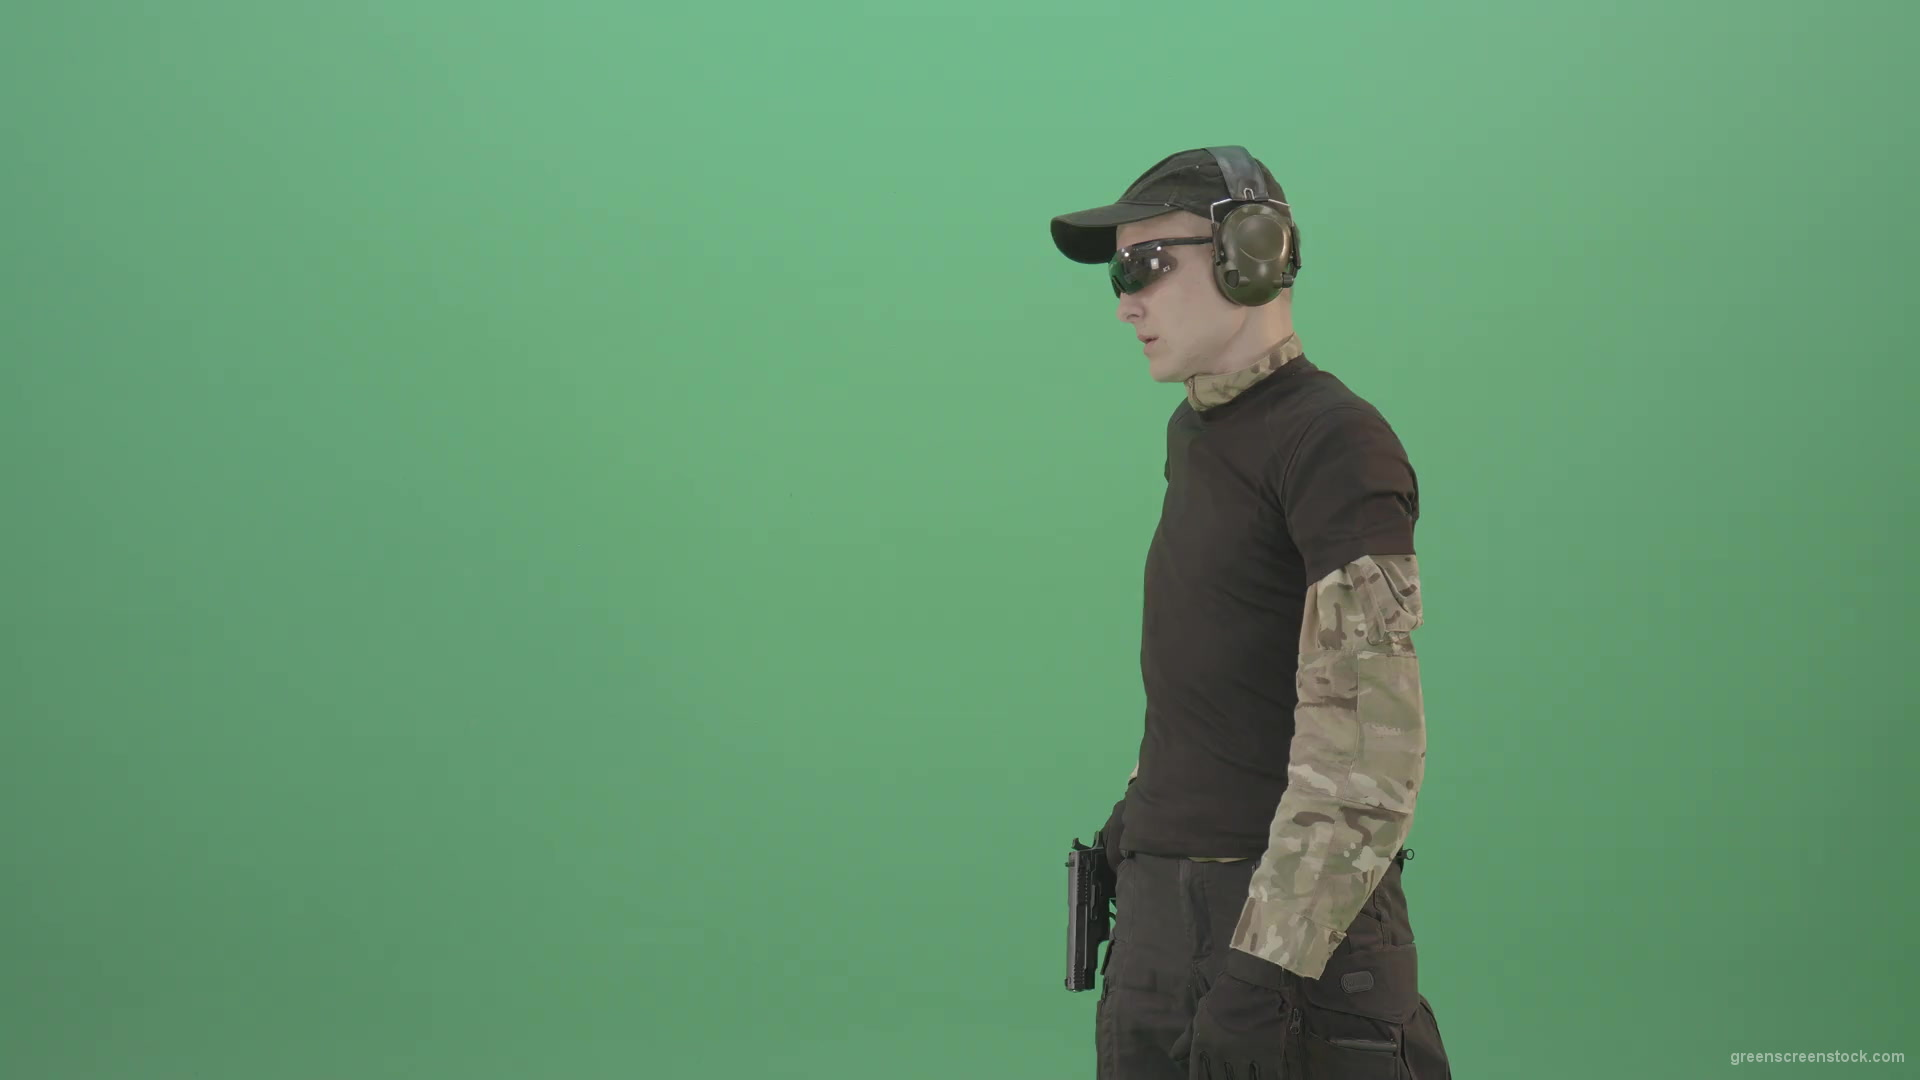 Young-boy-sodier-testin-small-pistol-gun-and-shooting-isolated-on-green-screen-4K-Video-Footage-1920_001 Green Screen Stock